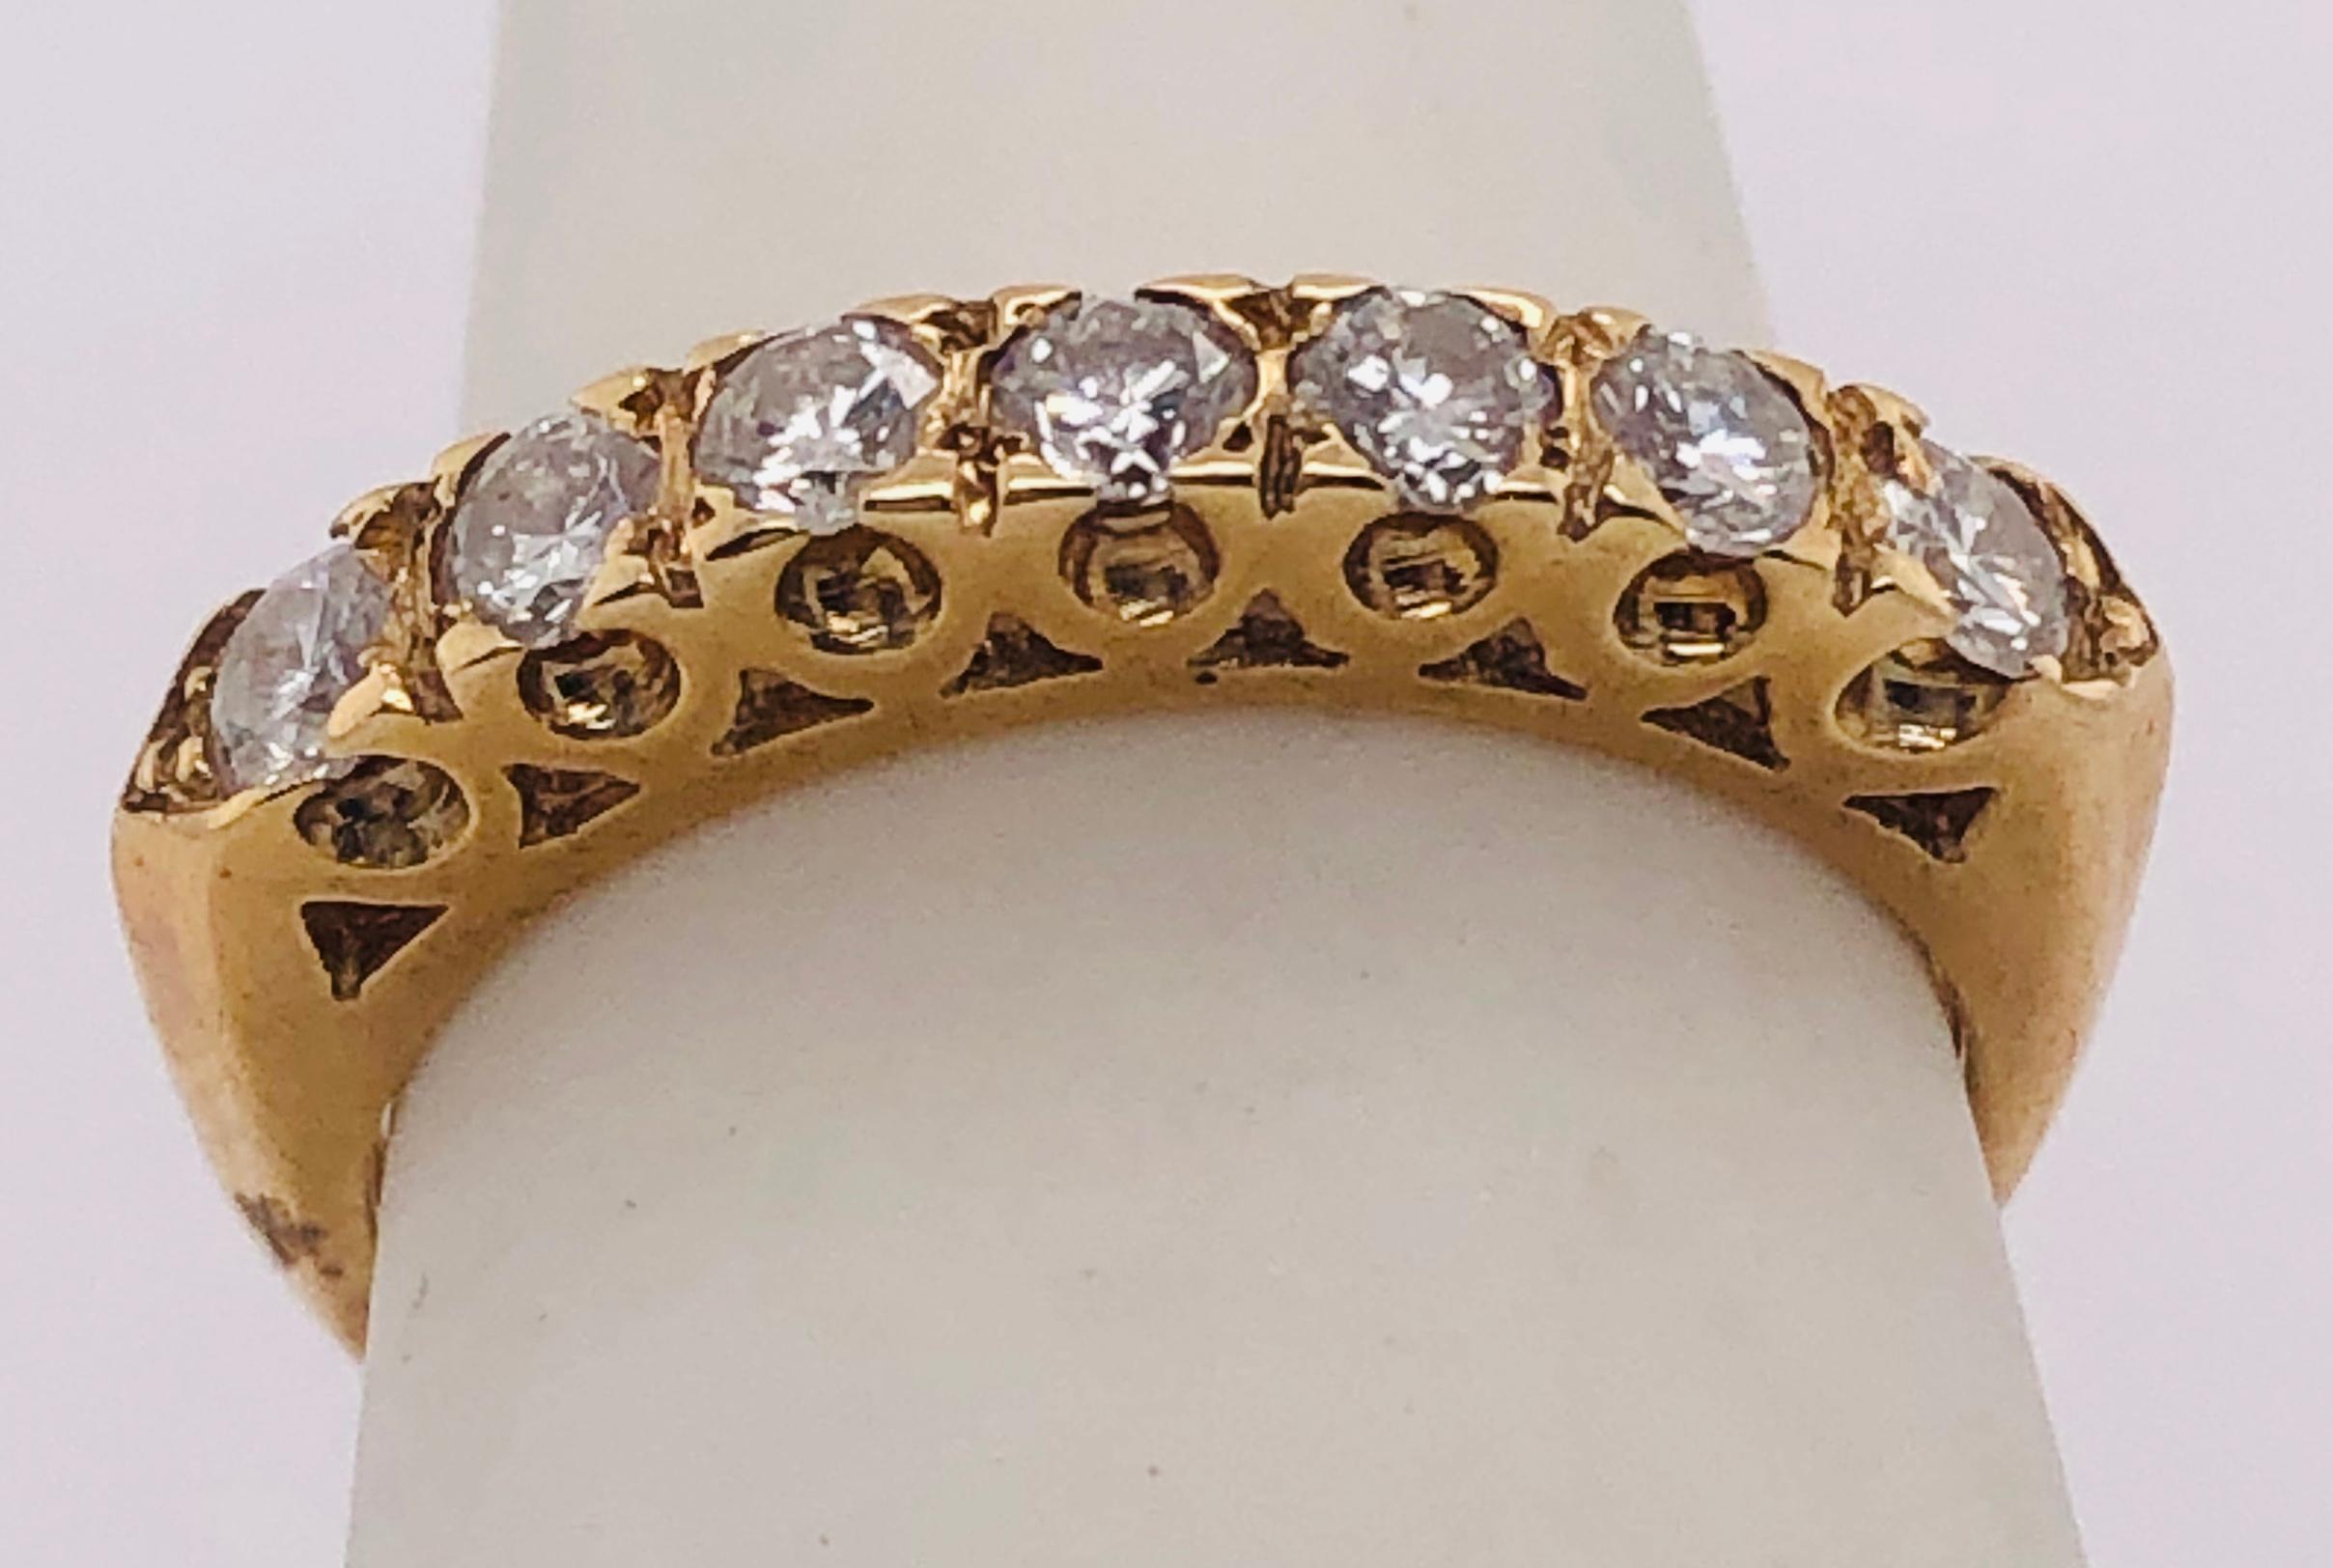 14 Kt Yellow Gold Seven Diamond Anniversary Ring Wedding Band 0.70 Total Diamond Weight
Size 5.5 
2.41 grams total weight